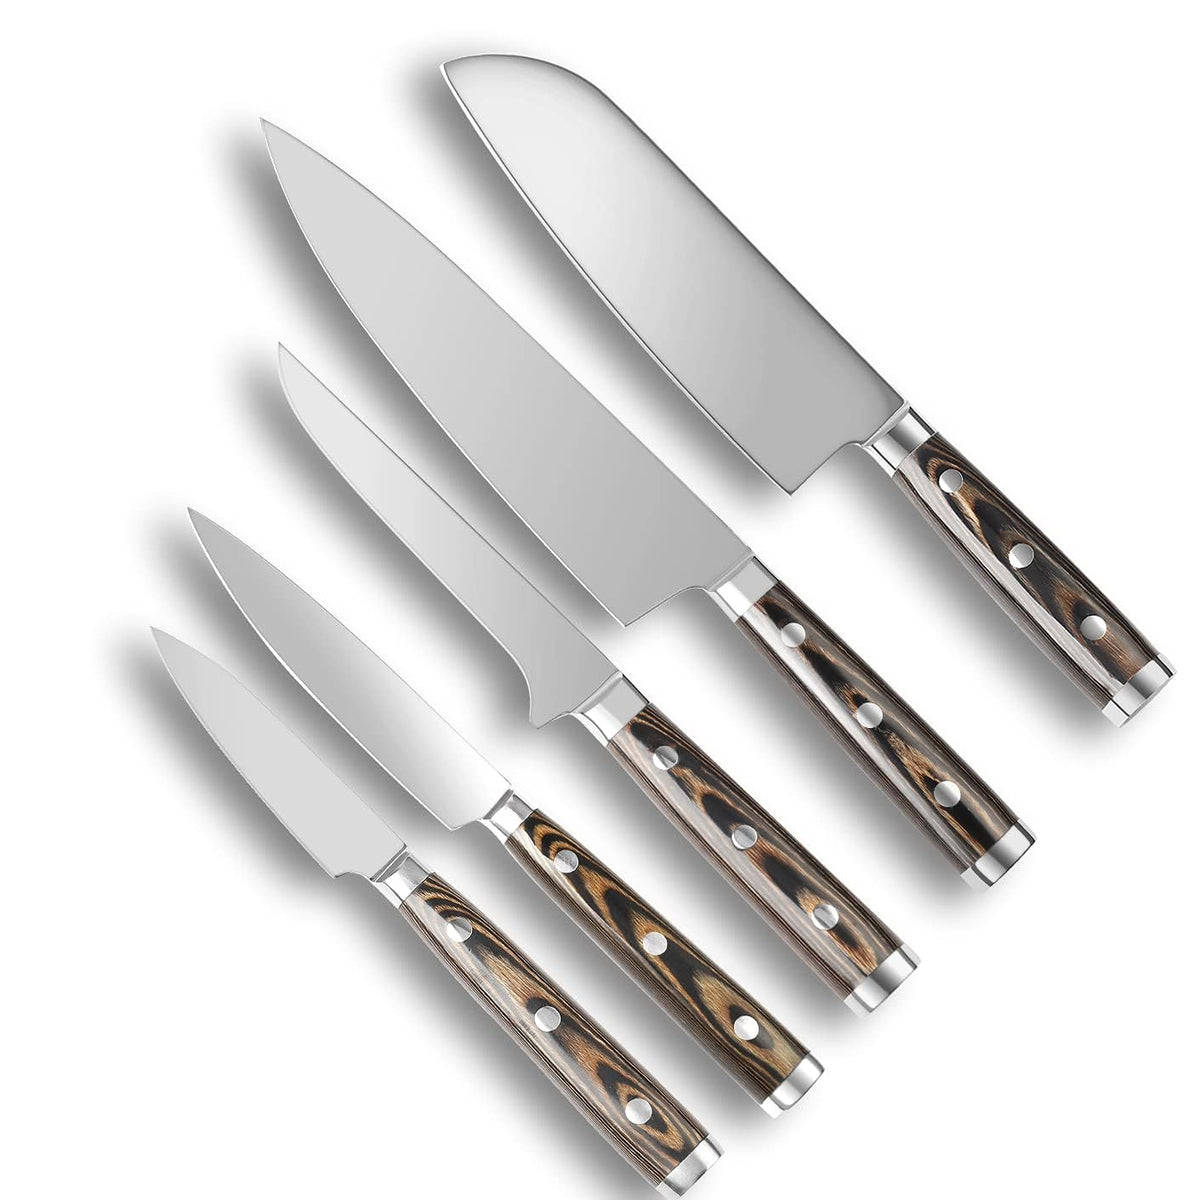 kitchen knives 1-10pcs 7CR17 High Carbon Stainless Steel